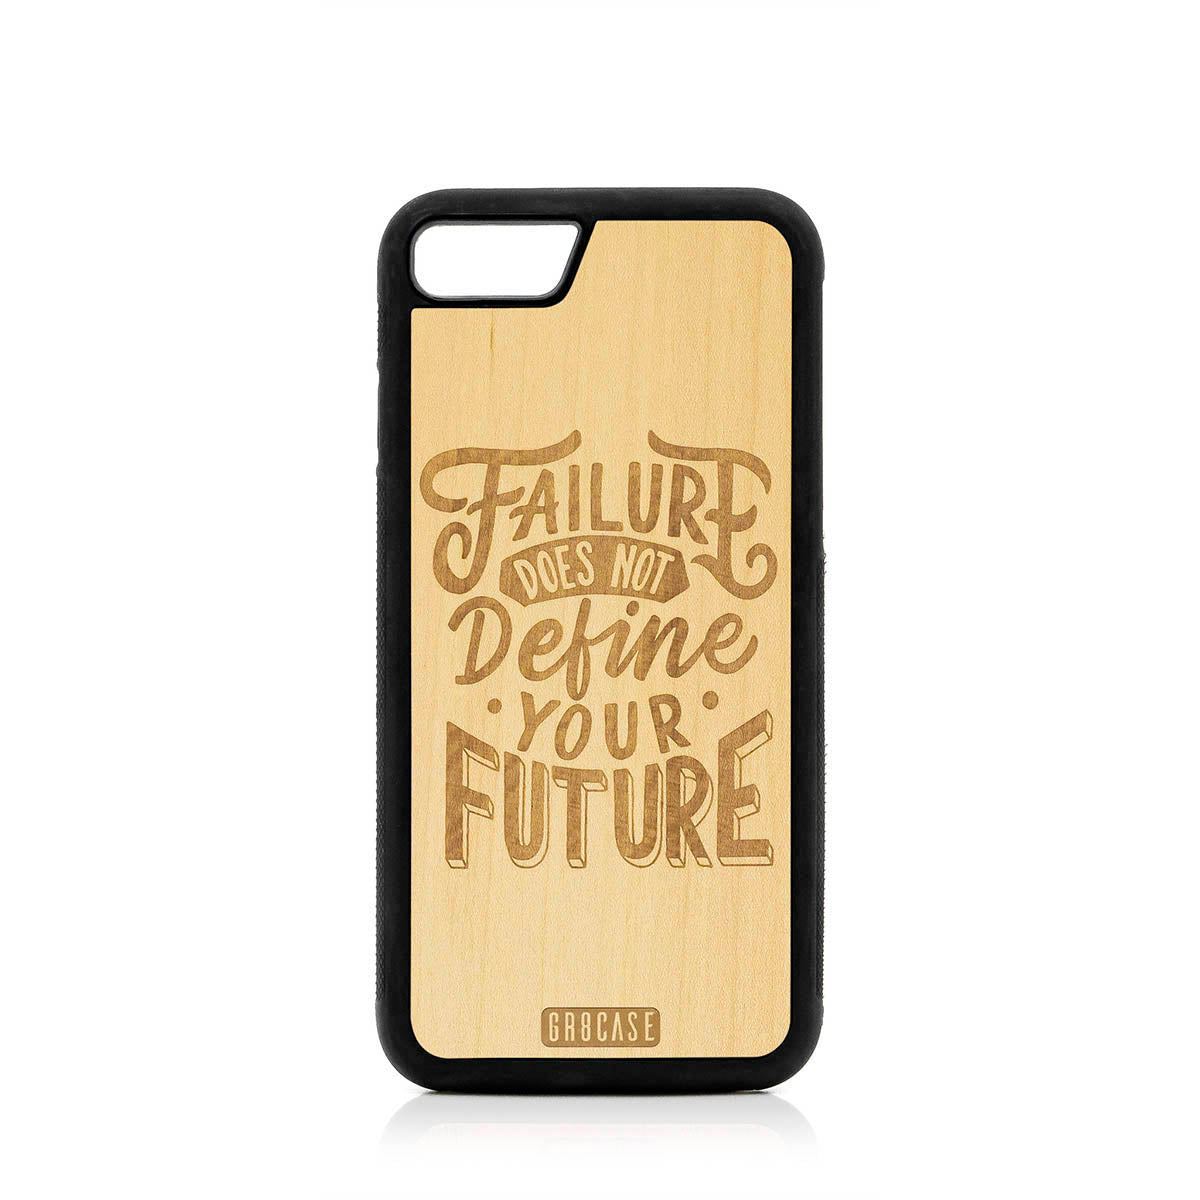 Failure Does Not Define You Future Design Wood Case For iPhone SE 2020 by GR8CASE